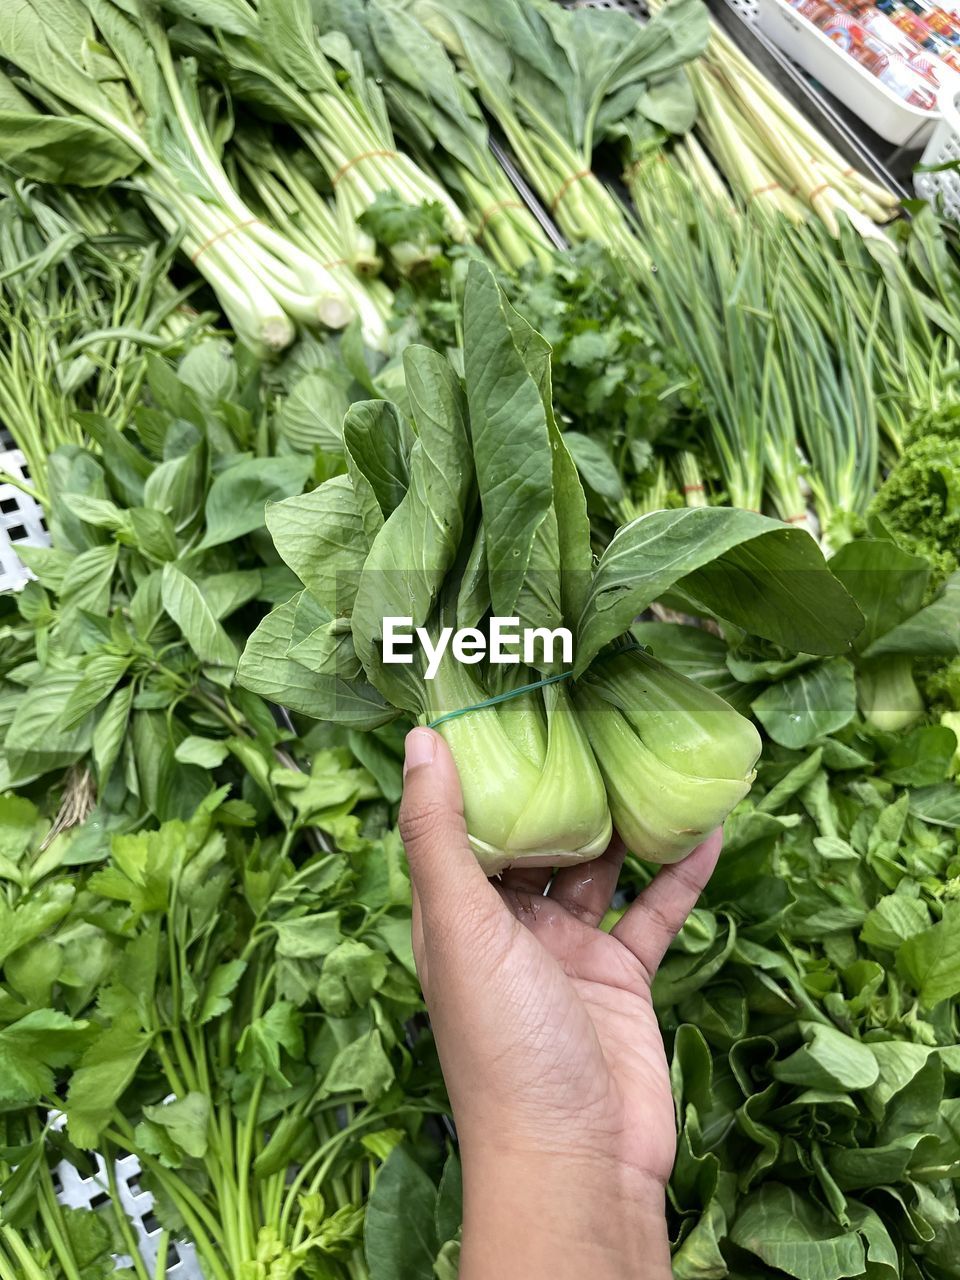 hand, food and drink, food, freshness, vegetable, green, healthy eating, wellbeing, one person, produce, holding, organic, adult, high angle view, plant part, agriculture, leaf, plant, raw food, day, abundance, nature, retail, lifestyles, growth, outdoors, business, flower, market, close-up